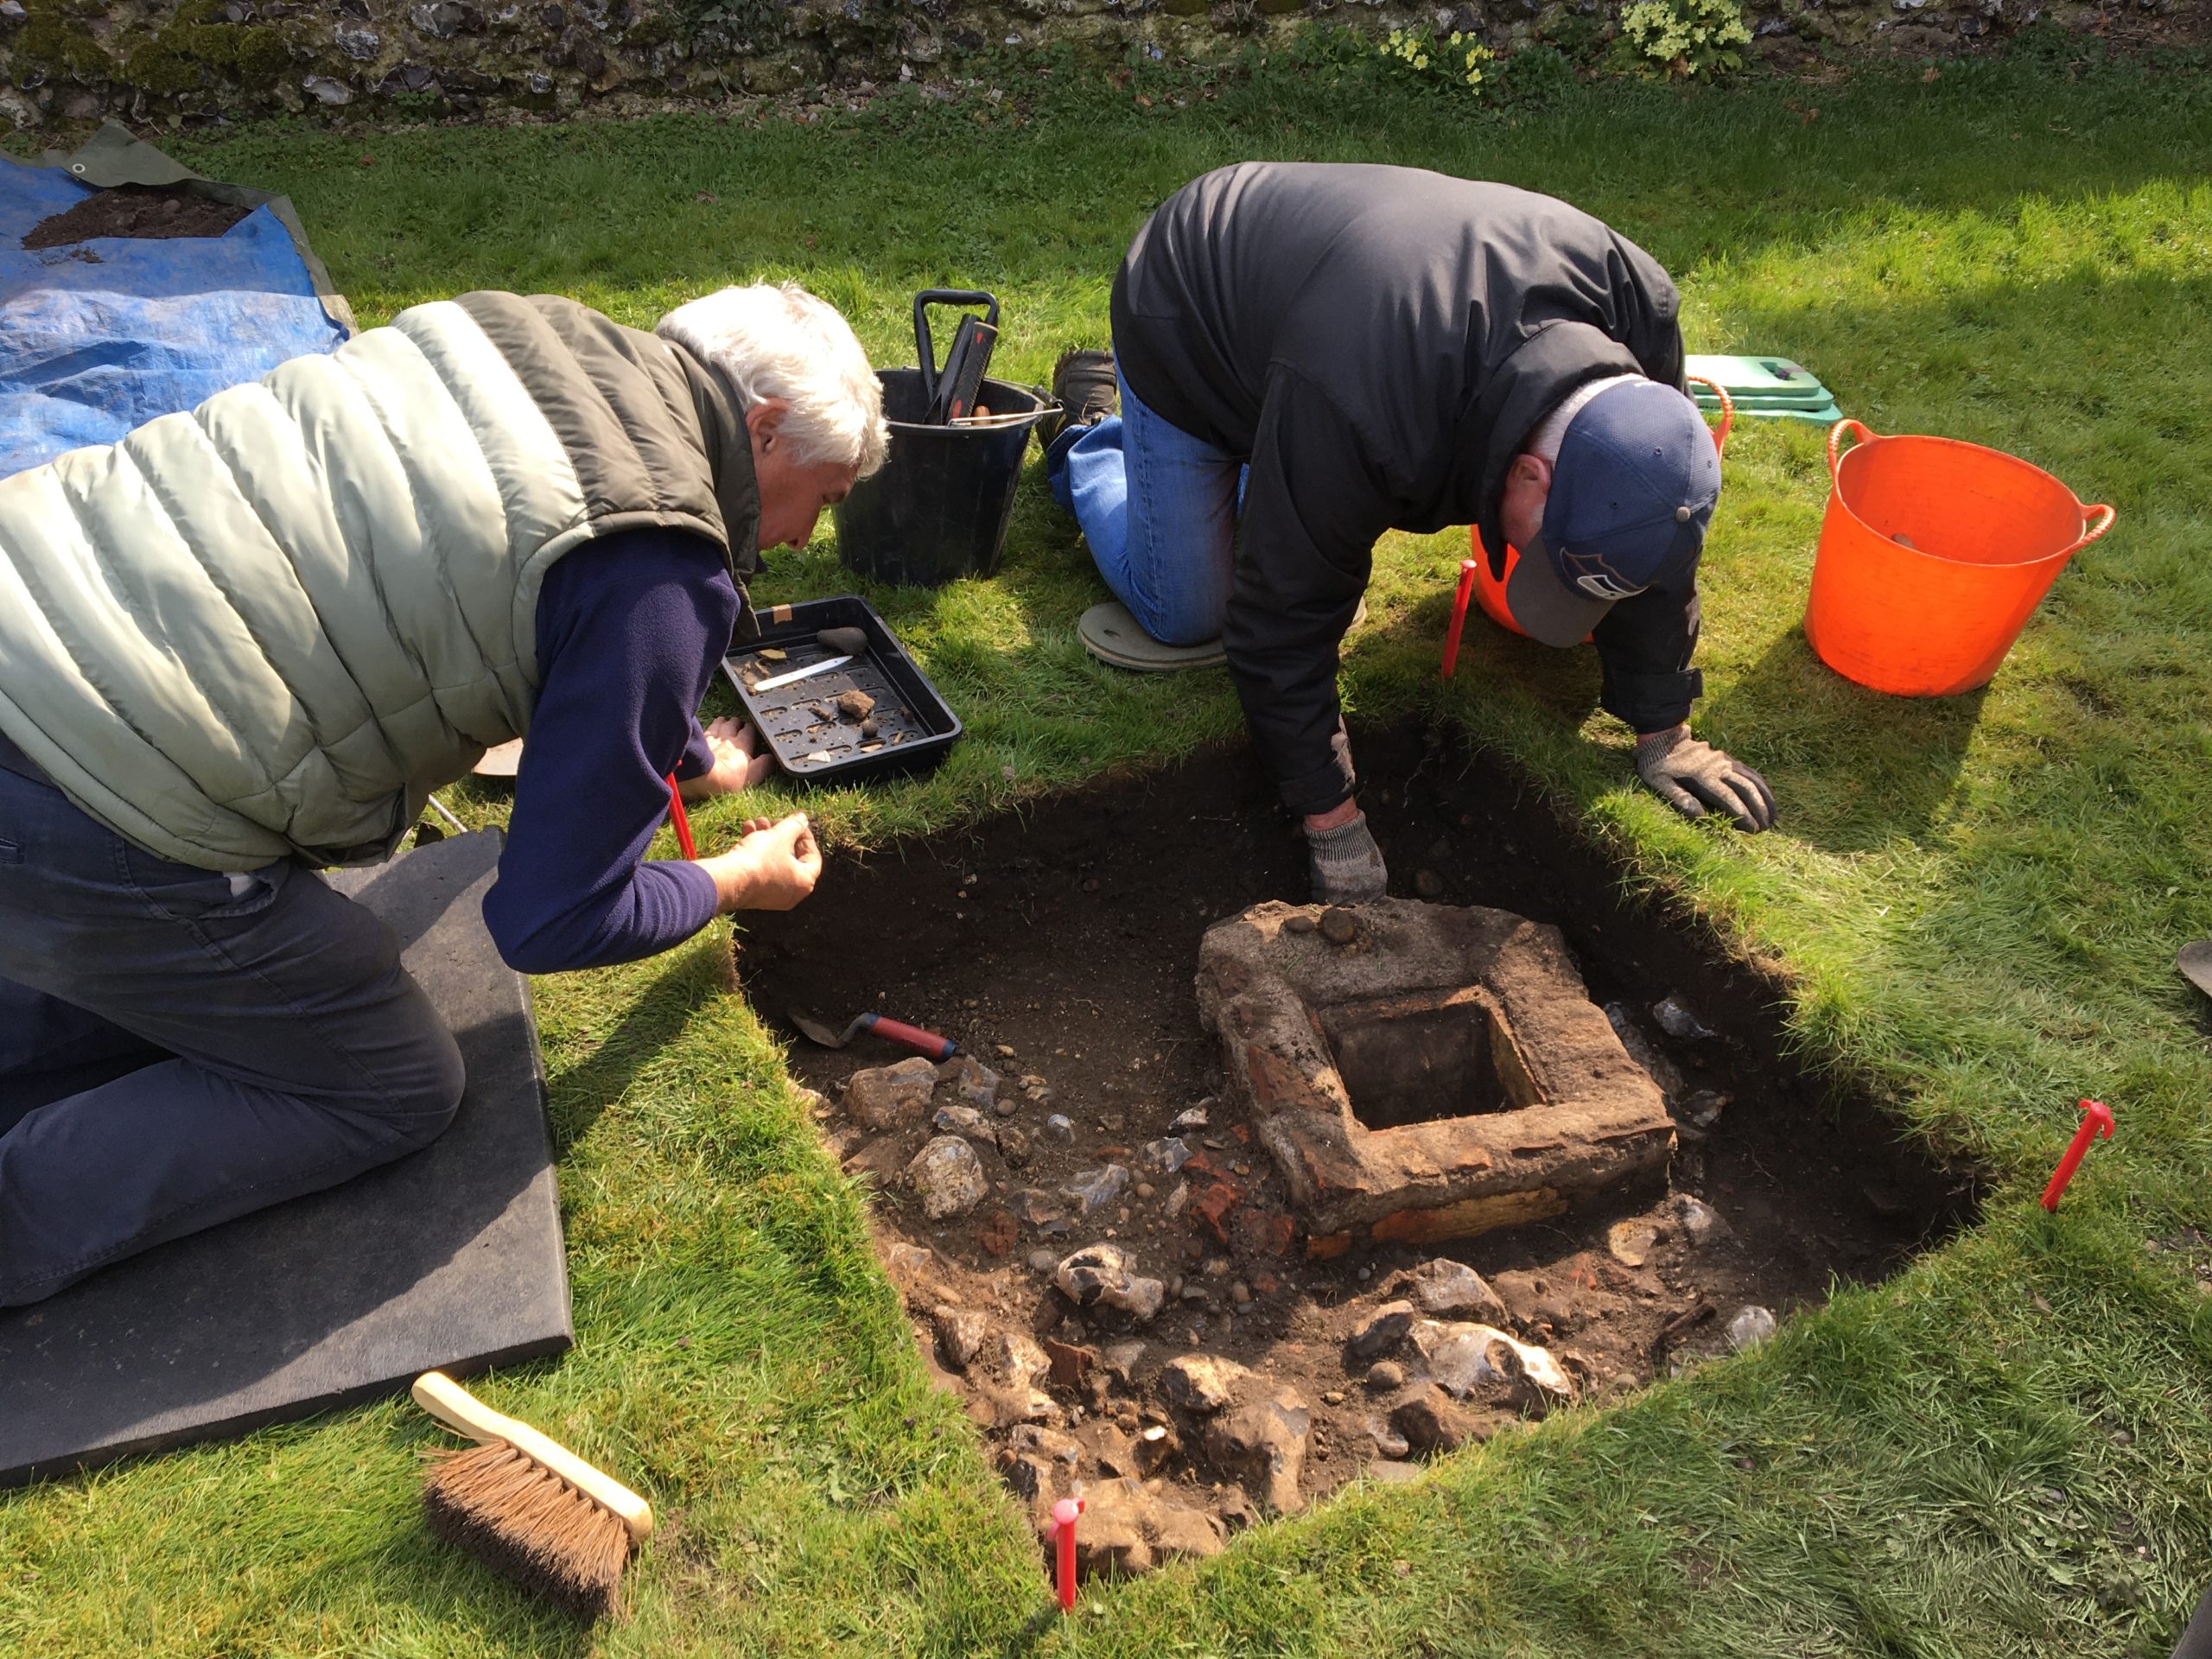 Two men digging a hole in grass with archaeological remains inside